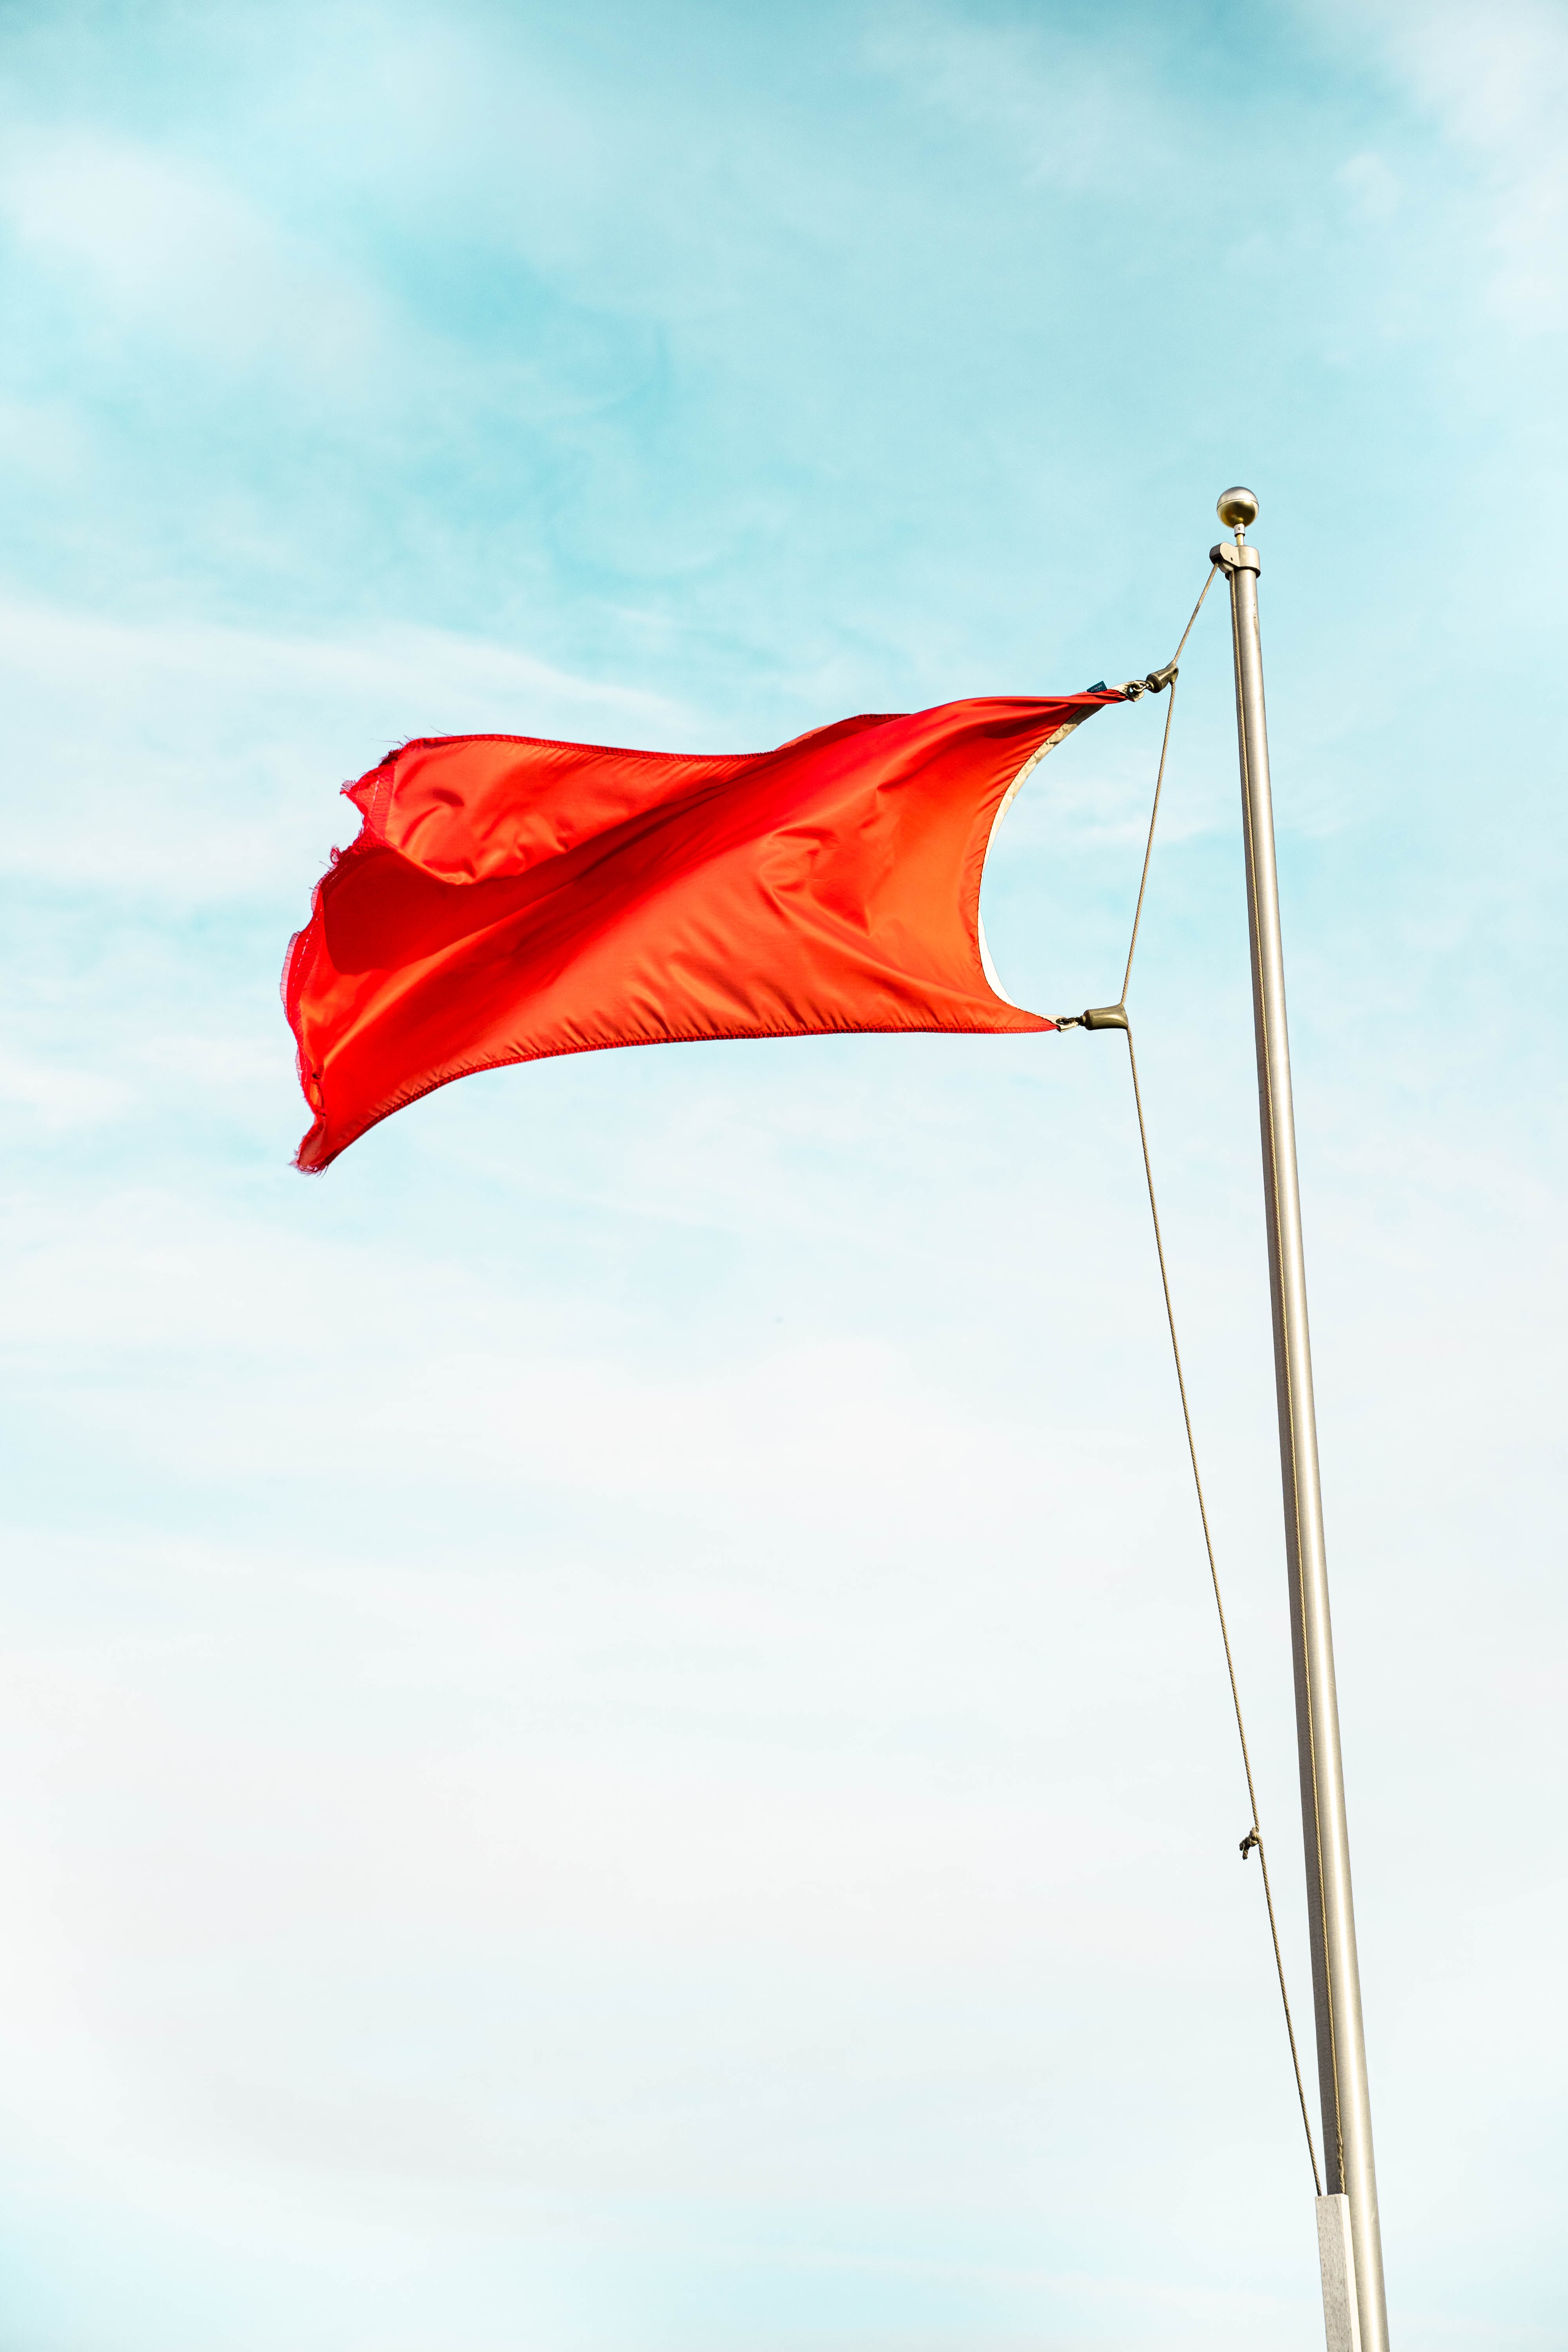 Download wallpaper 4000x6000 flag, red, flagpole, sky hd background